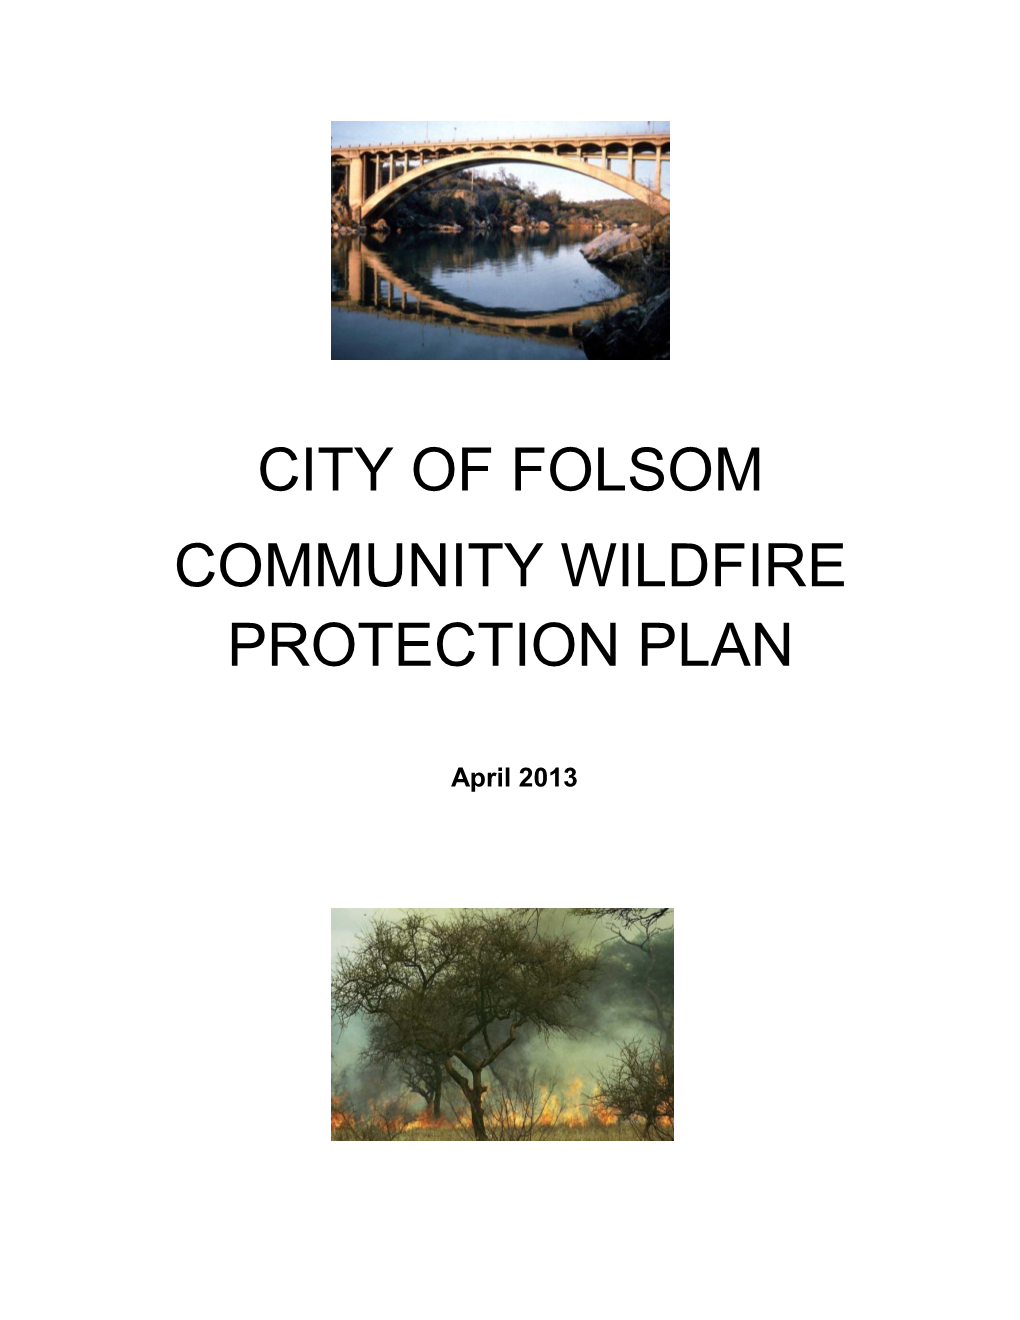 City of Folsom Community Wildfire Protection Plan